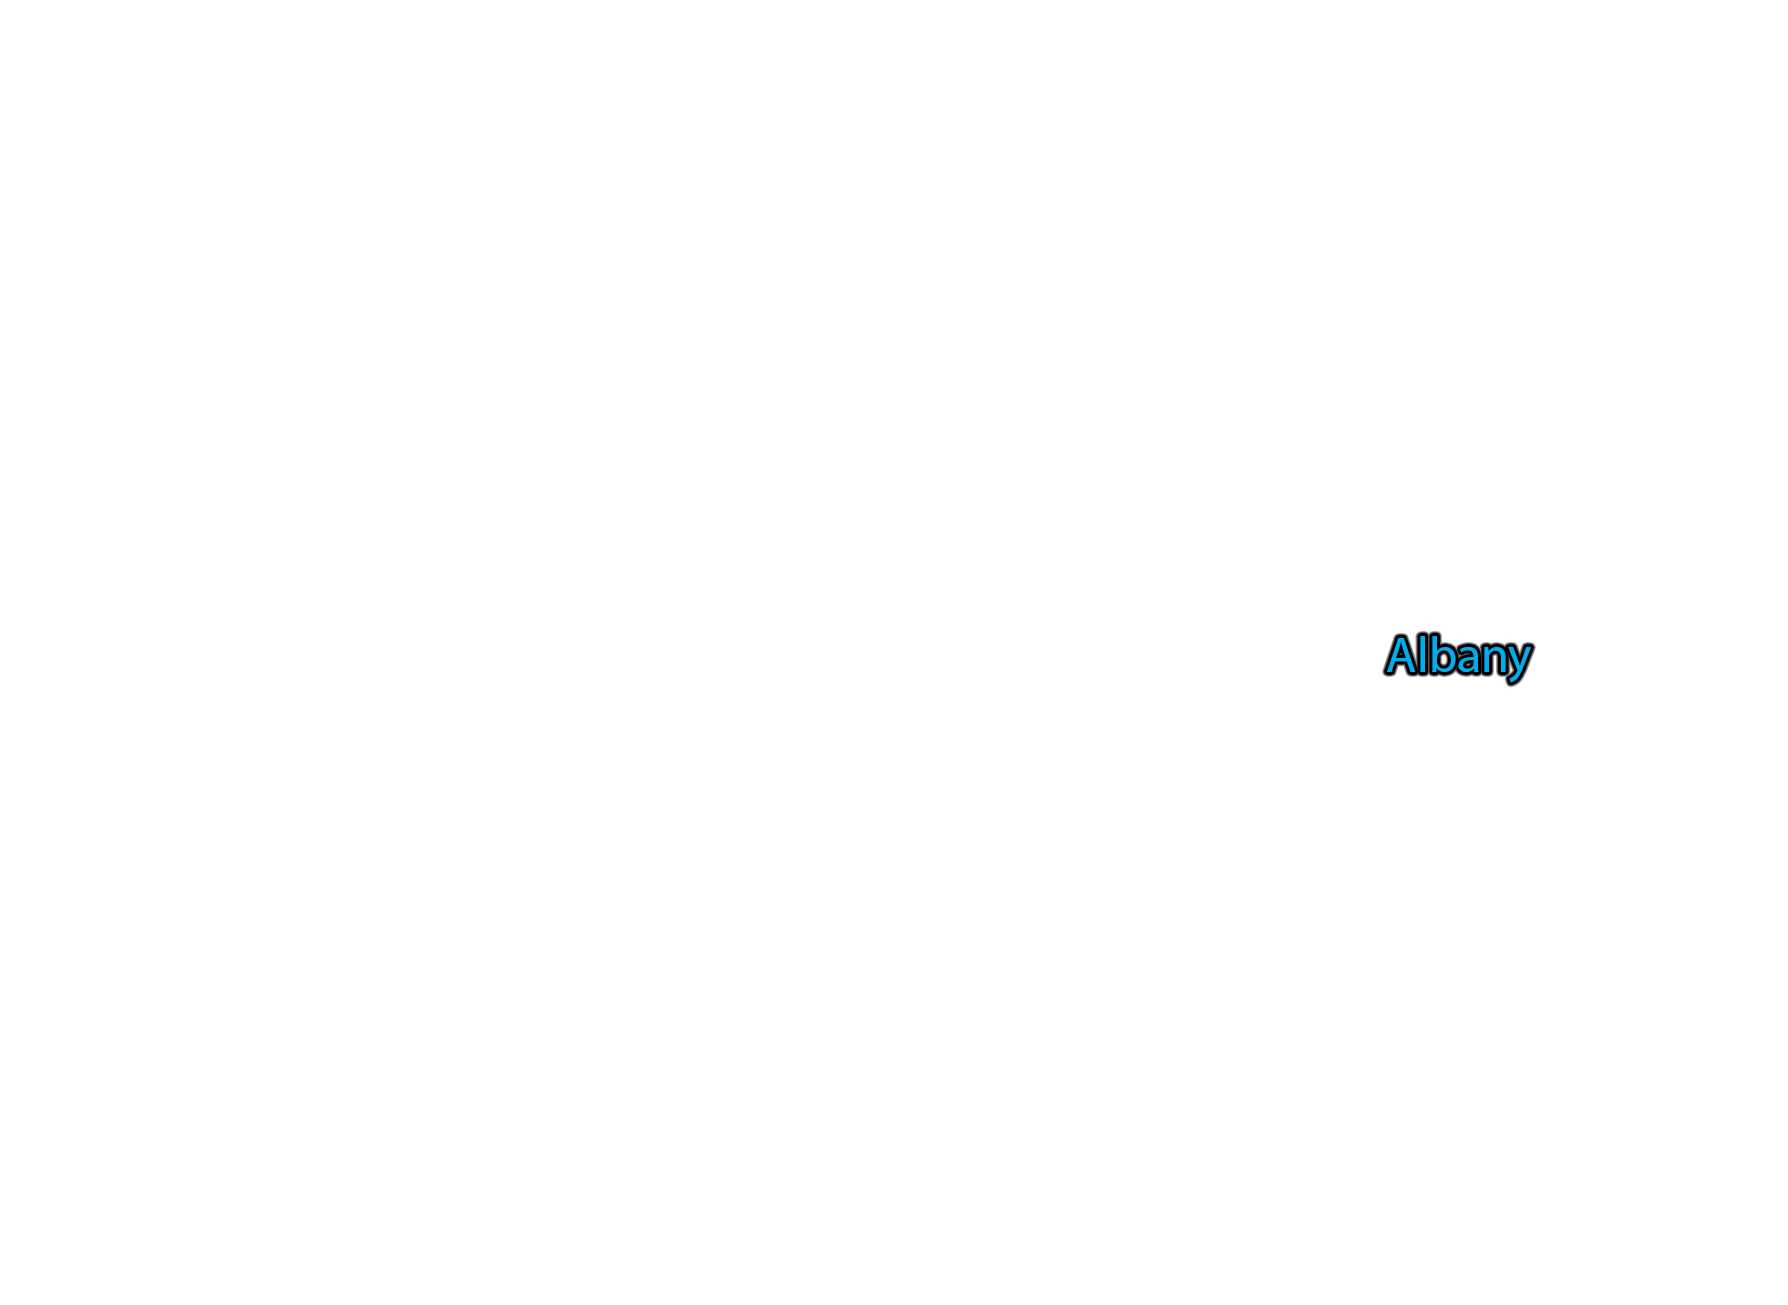 Albany label with glow